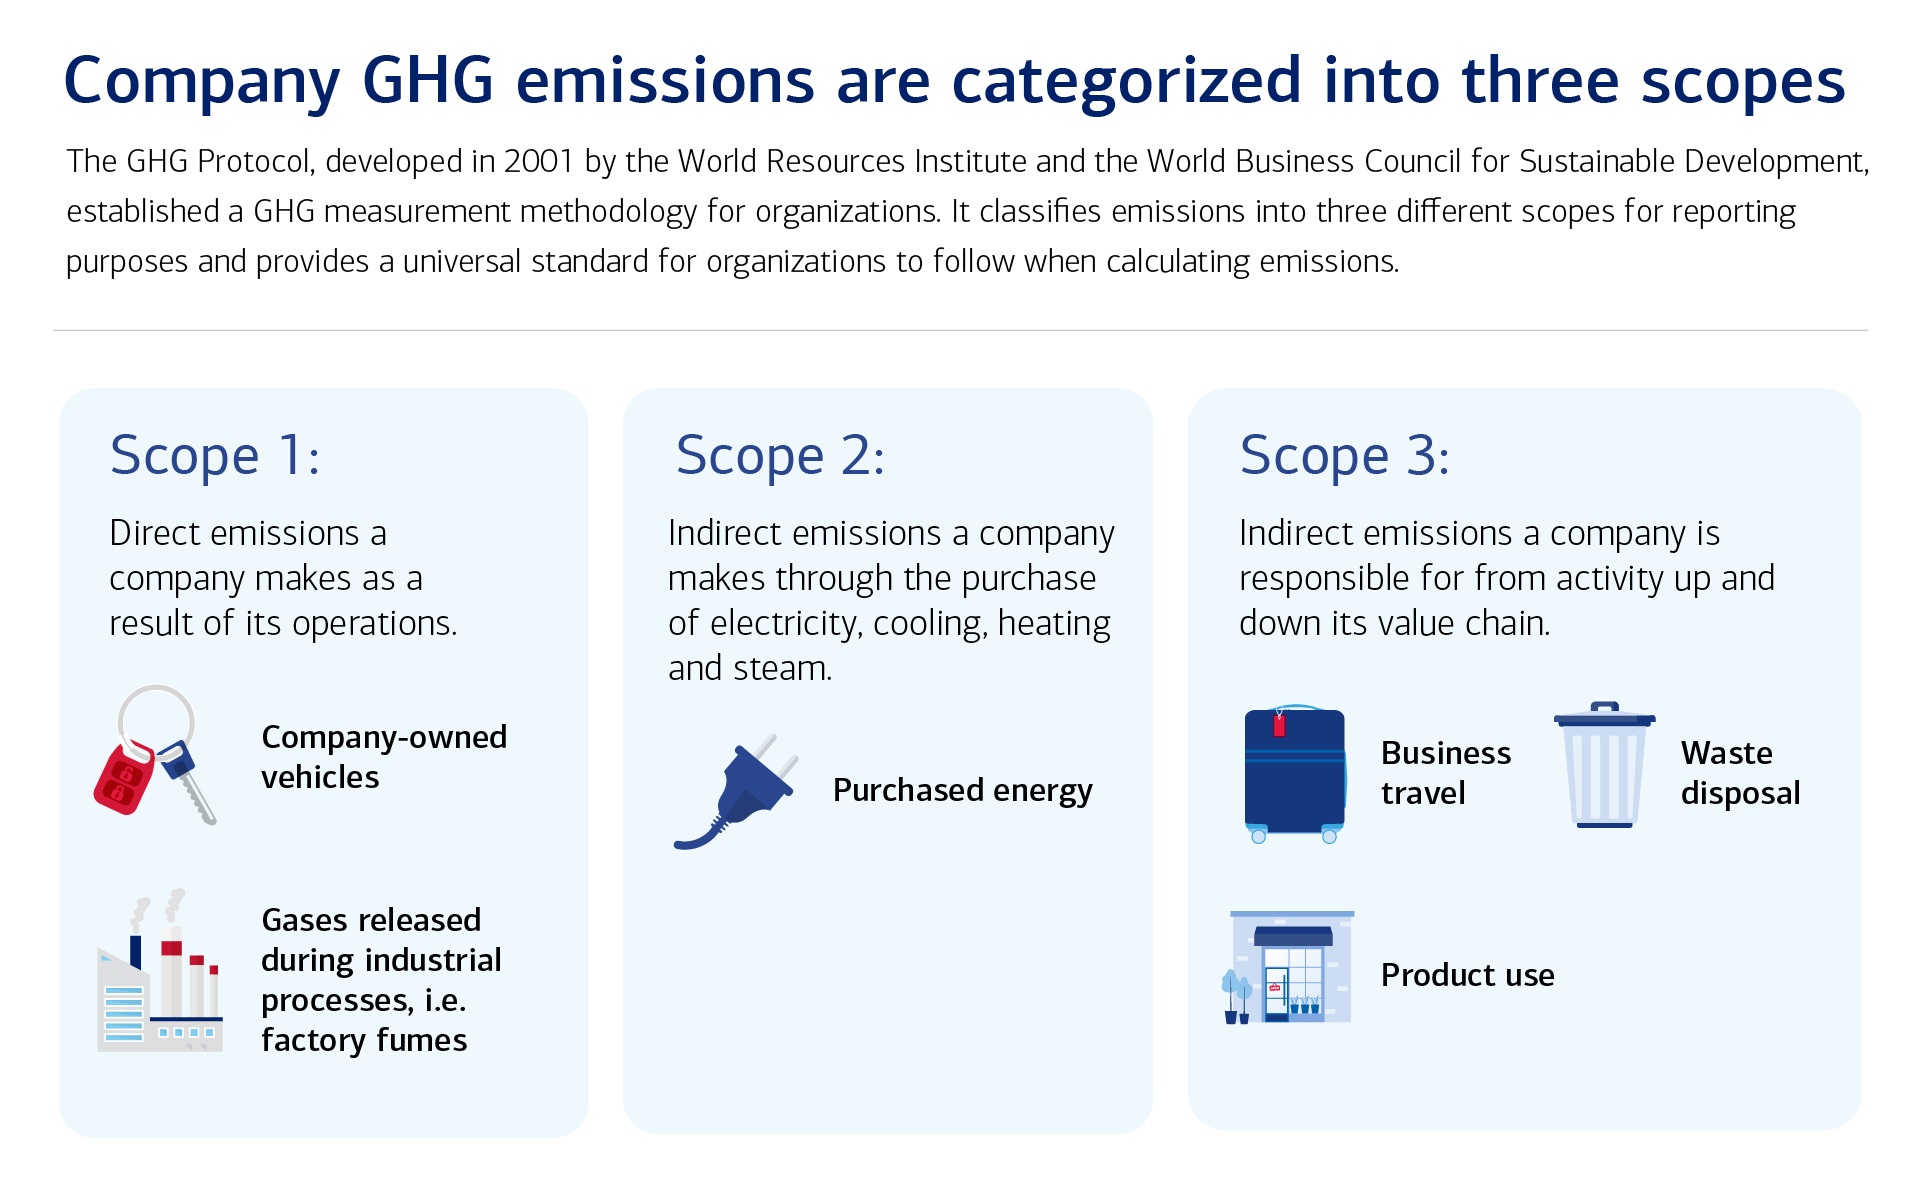 Company GHG emissions are categorized into three scopes. The GHG Protocol, developed in 2001 by the World Resources Institute and the World Business Council for Sustainable Development, established a GHG measurement methodology for organizations. It classifies emissions into three different scopes for reporting purposes and provides a universal standard for organizations to follow when calculating emissions. Scope 1: Direct emissions a company makes as a result of its operations. (Company-owned vehicles + Gases released during industrial processes, i.e. factory fumes. Scope 2: Indirect emissions a company makes through the purchase of electricity, cooling, heating and steam. (Purcahsed energy). Scope 3: Indirect emissions a company is resonsible for from activity up and down its value chain. (Business travel + Waste disposal + Product use).